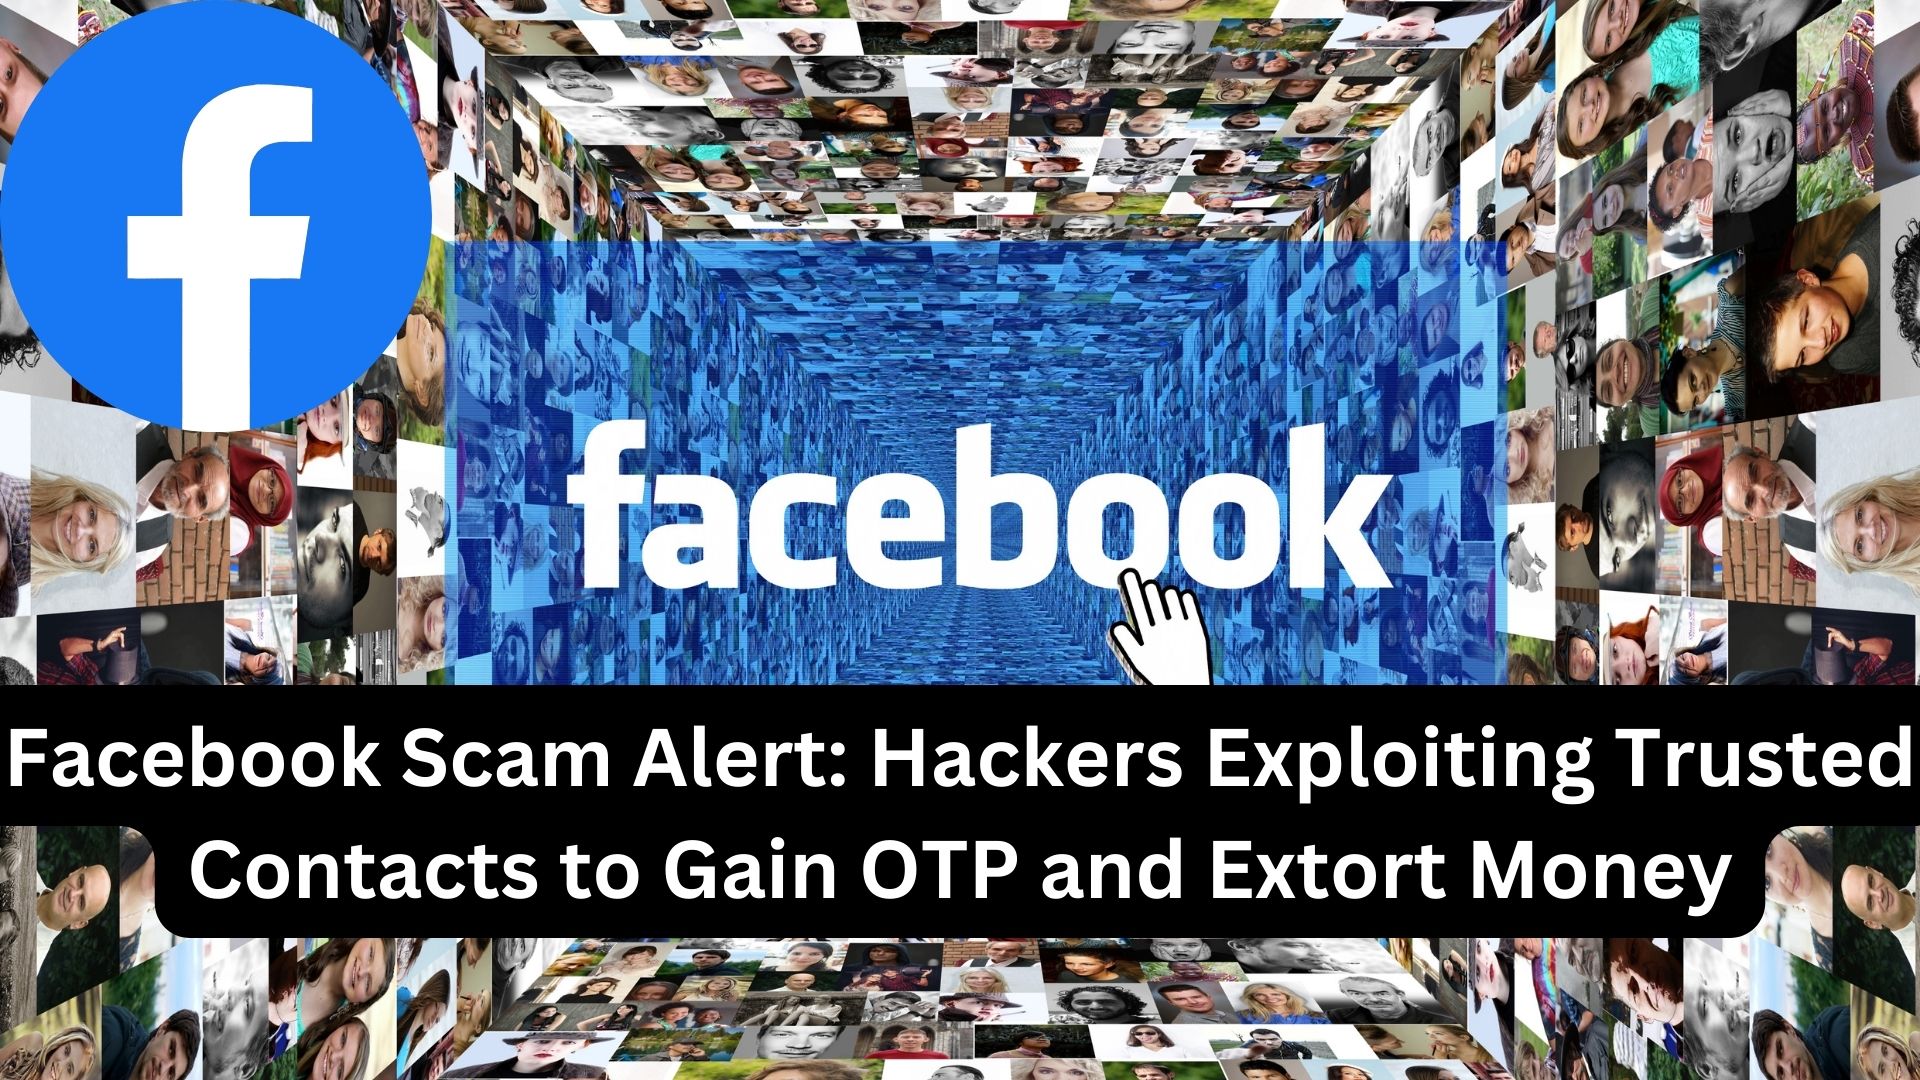 Facebook Scam Alert: Hackers Exploiting Trusted Contacts to Gain OTP and Extort Money